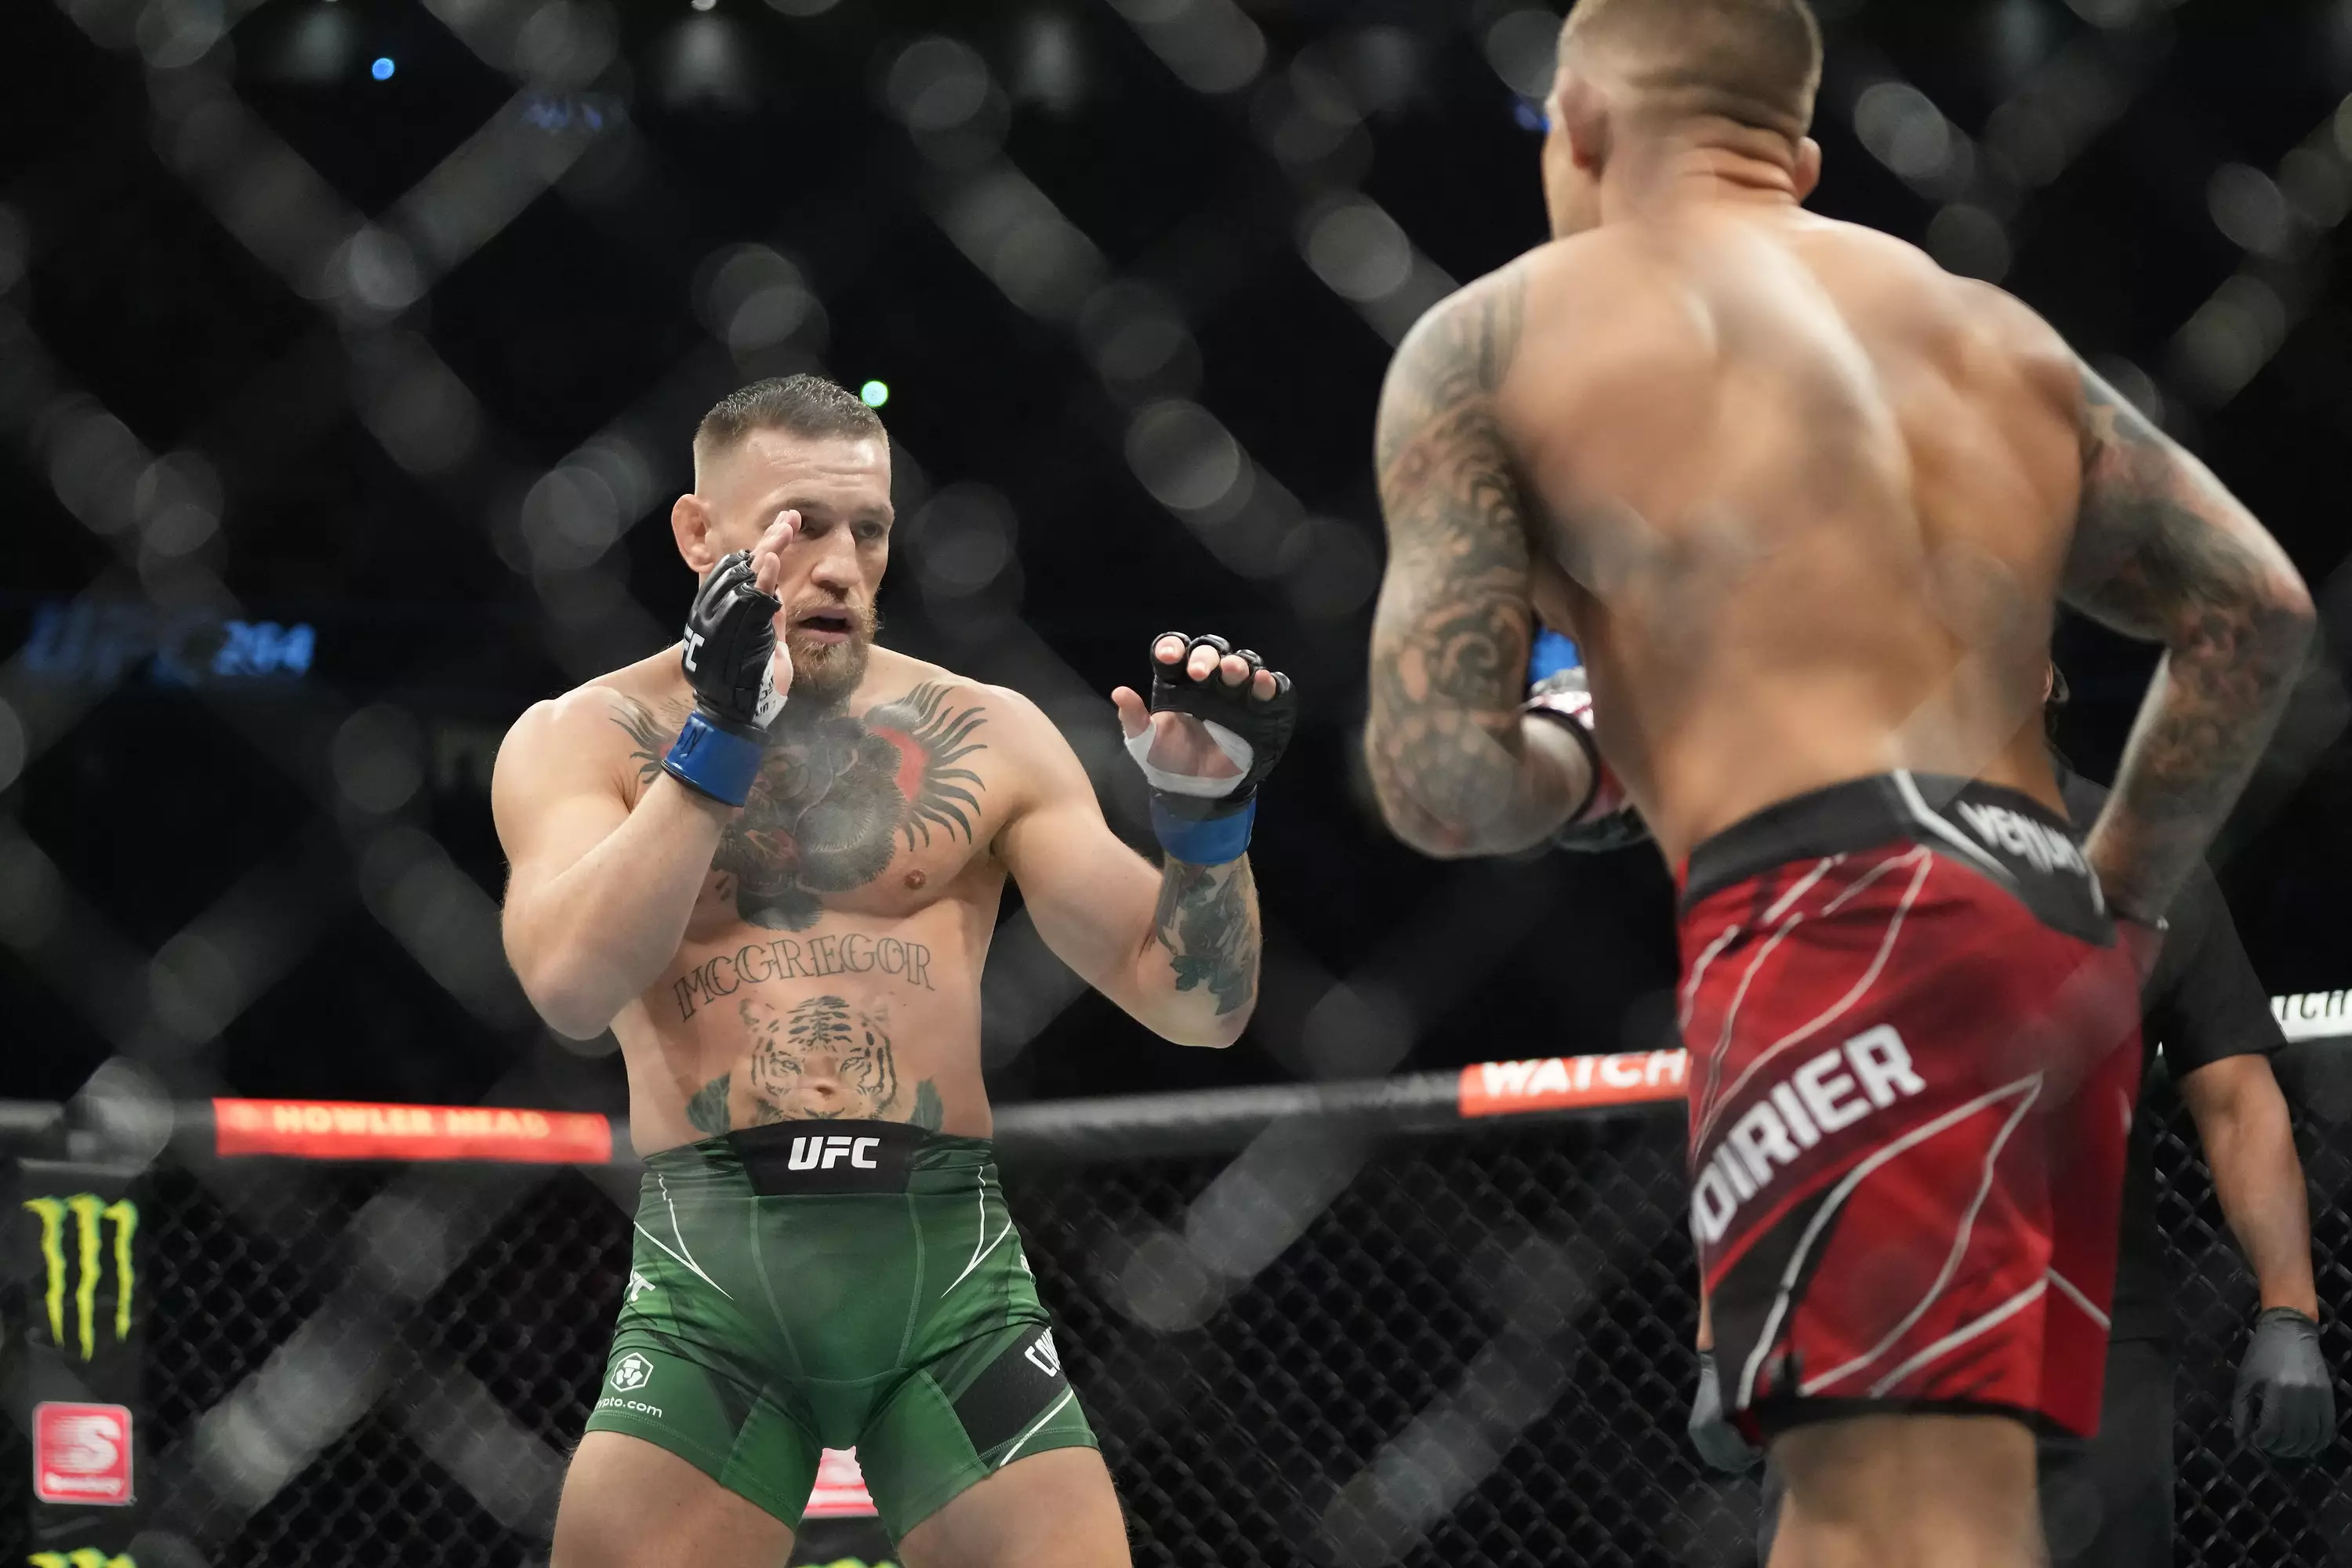 McGregor during his loss to Poirier. Image: PA Images